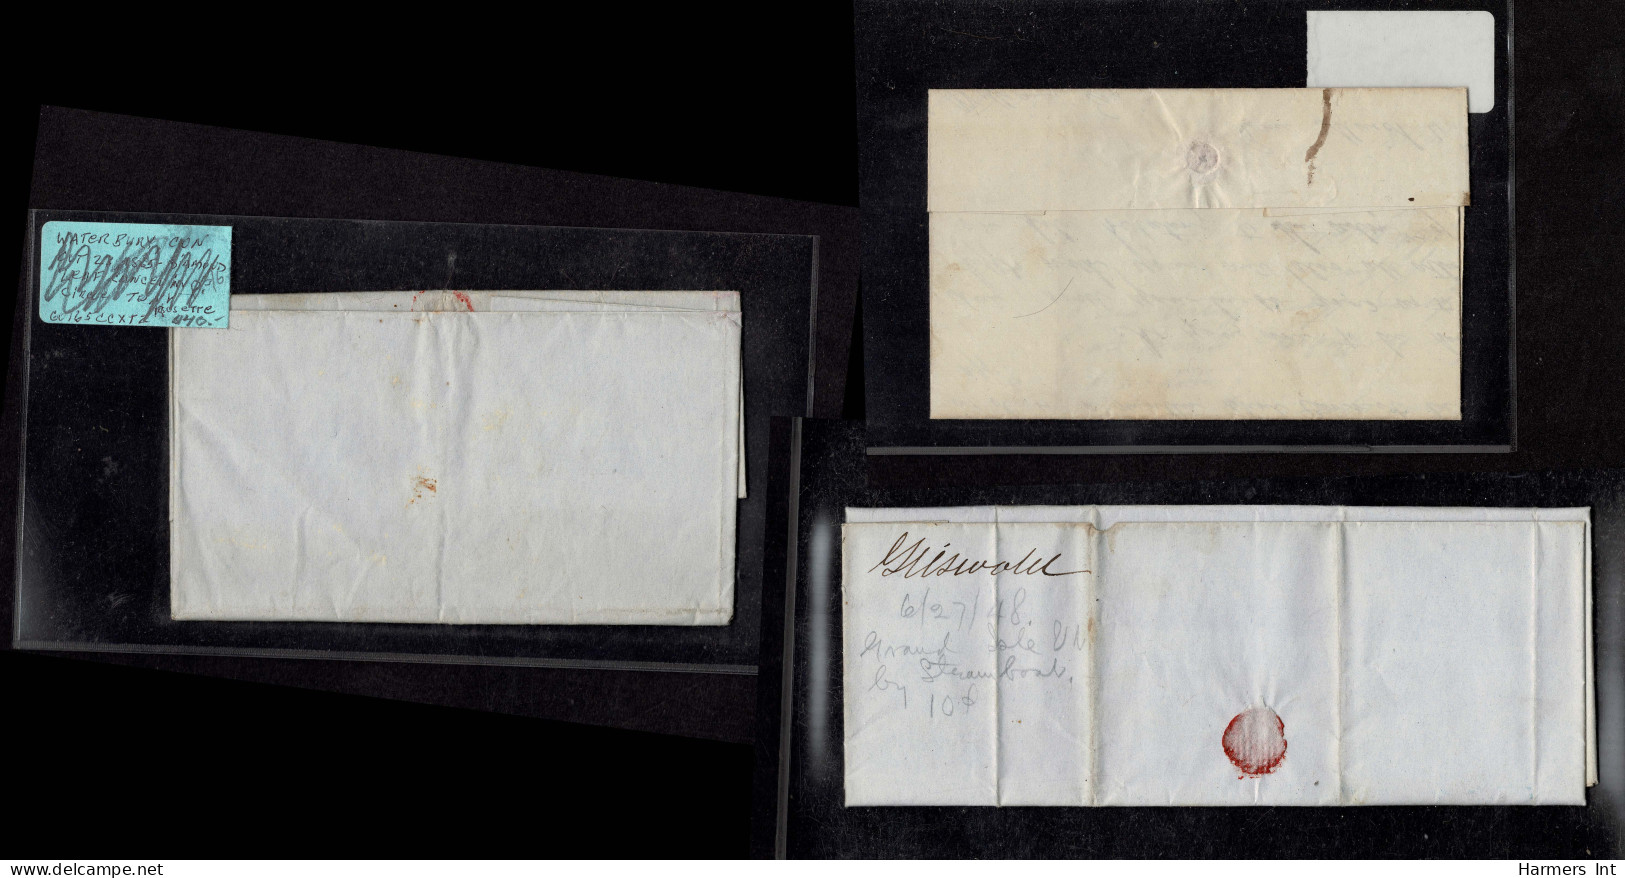 Lot # 096 Stampless Covers: 15 covers 1840's & 50's all bearing numeral handstamps in black, red or blue